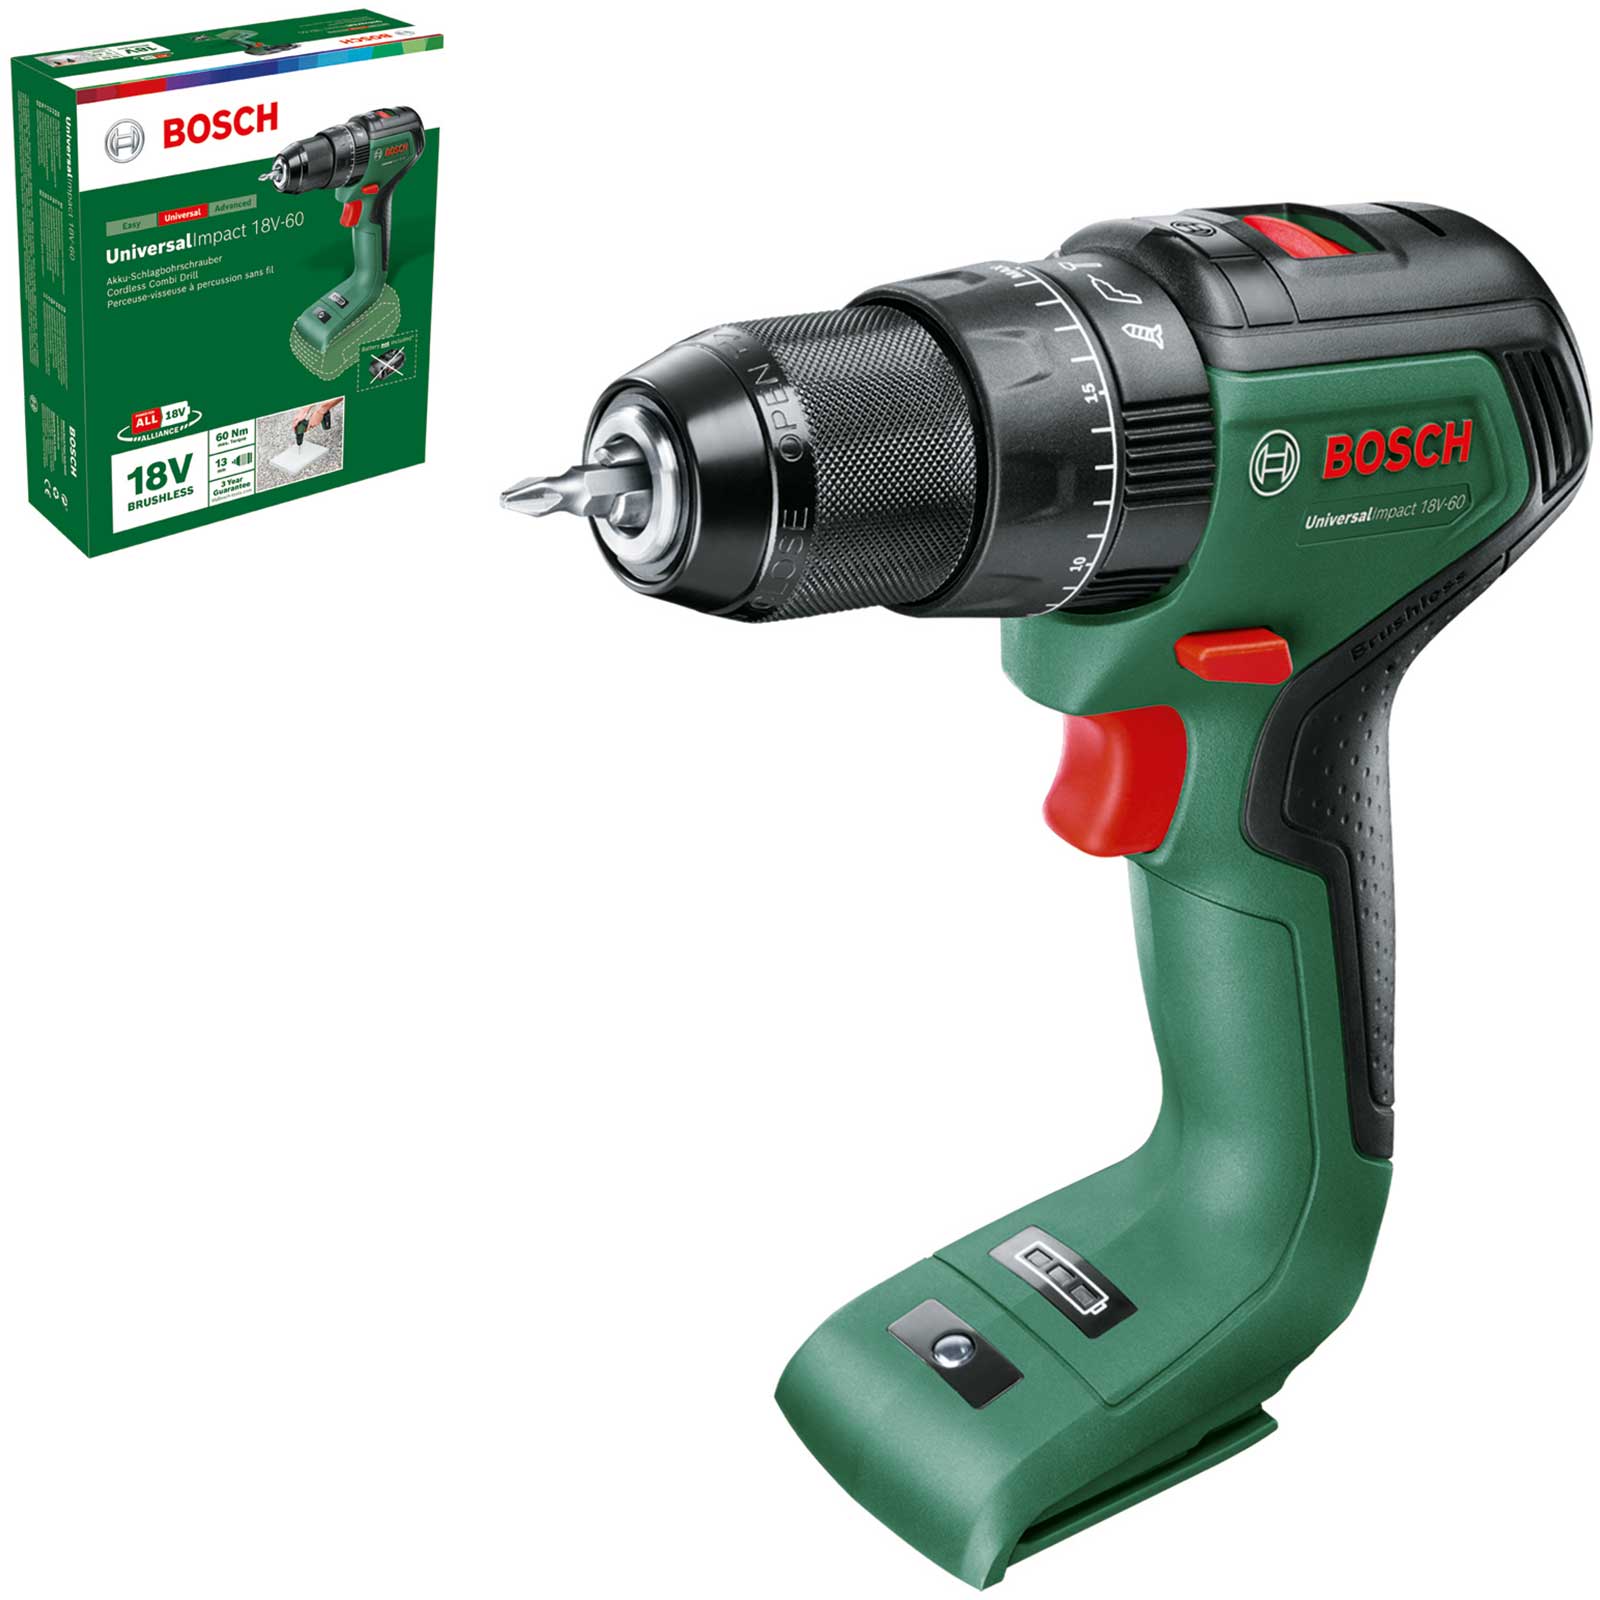 Bosch UNIVERSALIMPACT 18V-60 P4A 18v Cordless Brushless Combi Drill No Batteries No Charger No Case